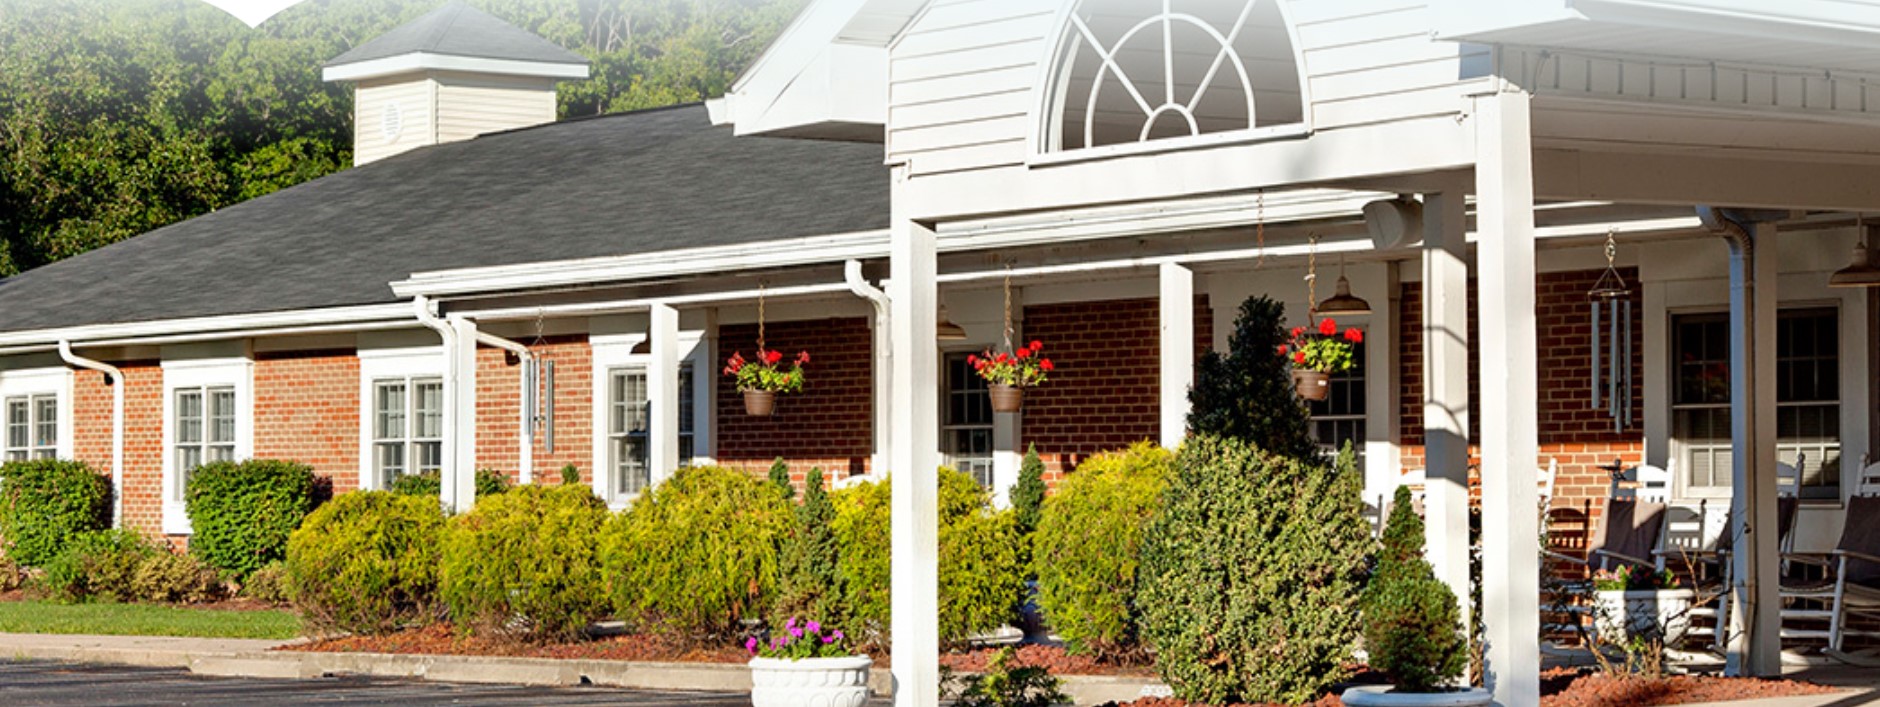 Image of SweetBriar Assisted Living